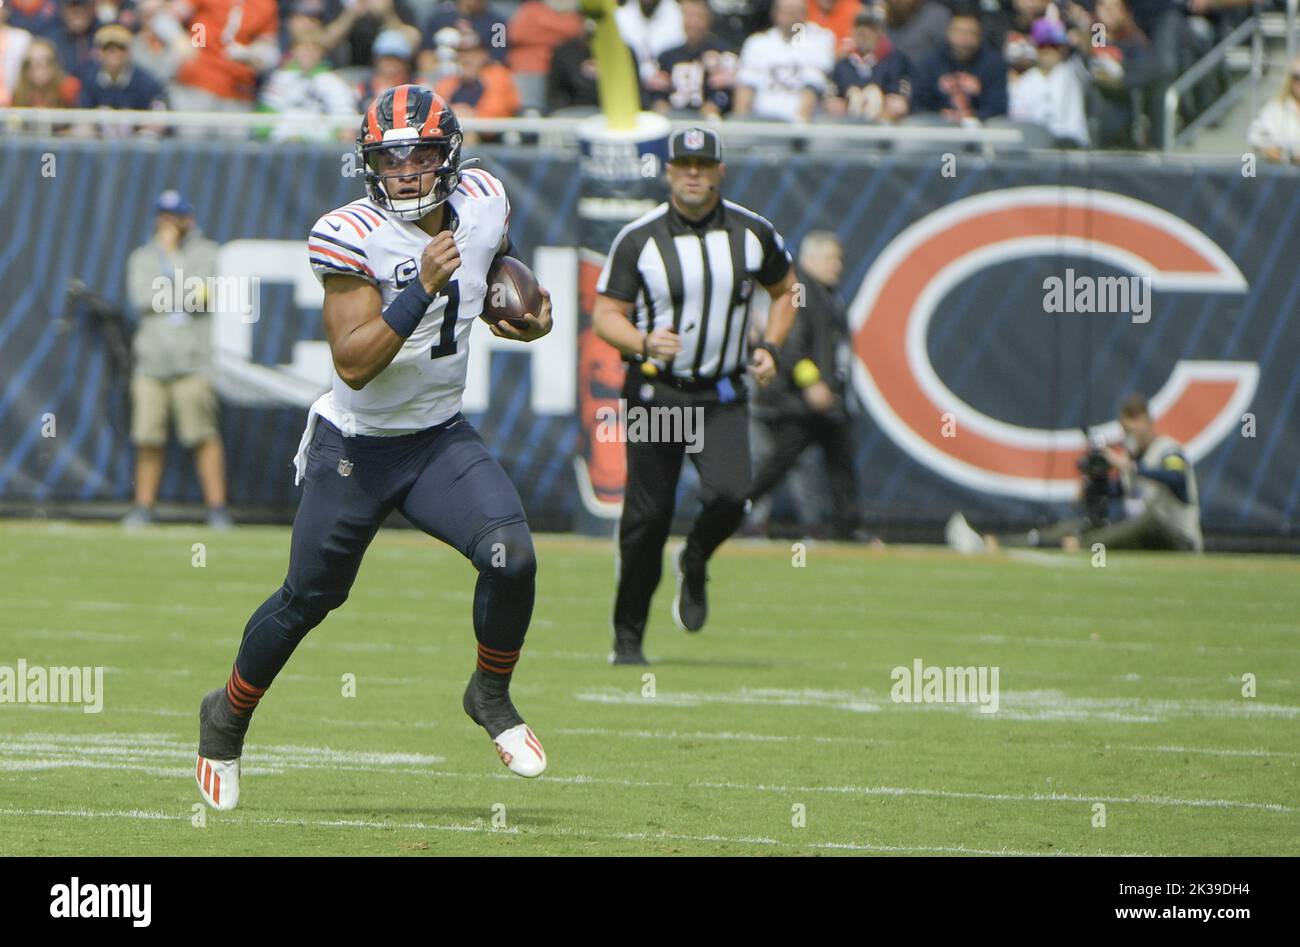 Chicago, United States. 25th Sep, 2022. Chicago Bears quarterback Justin Fields runs the ball against the Houston Texans during a game at Soldier Field in Chicago on Sunday, September 25, 2022. The Bears won 23-20. Photo by Mark Black/UPI Credit: UPI/Alamy Live News Stock Photo